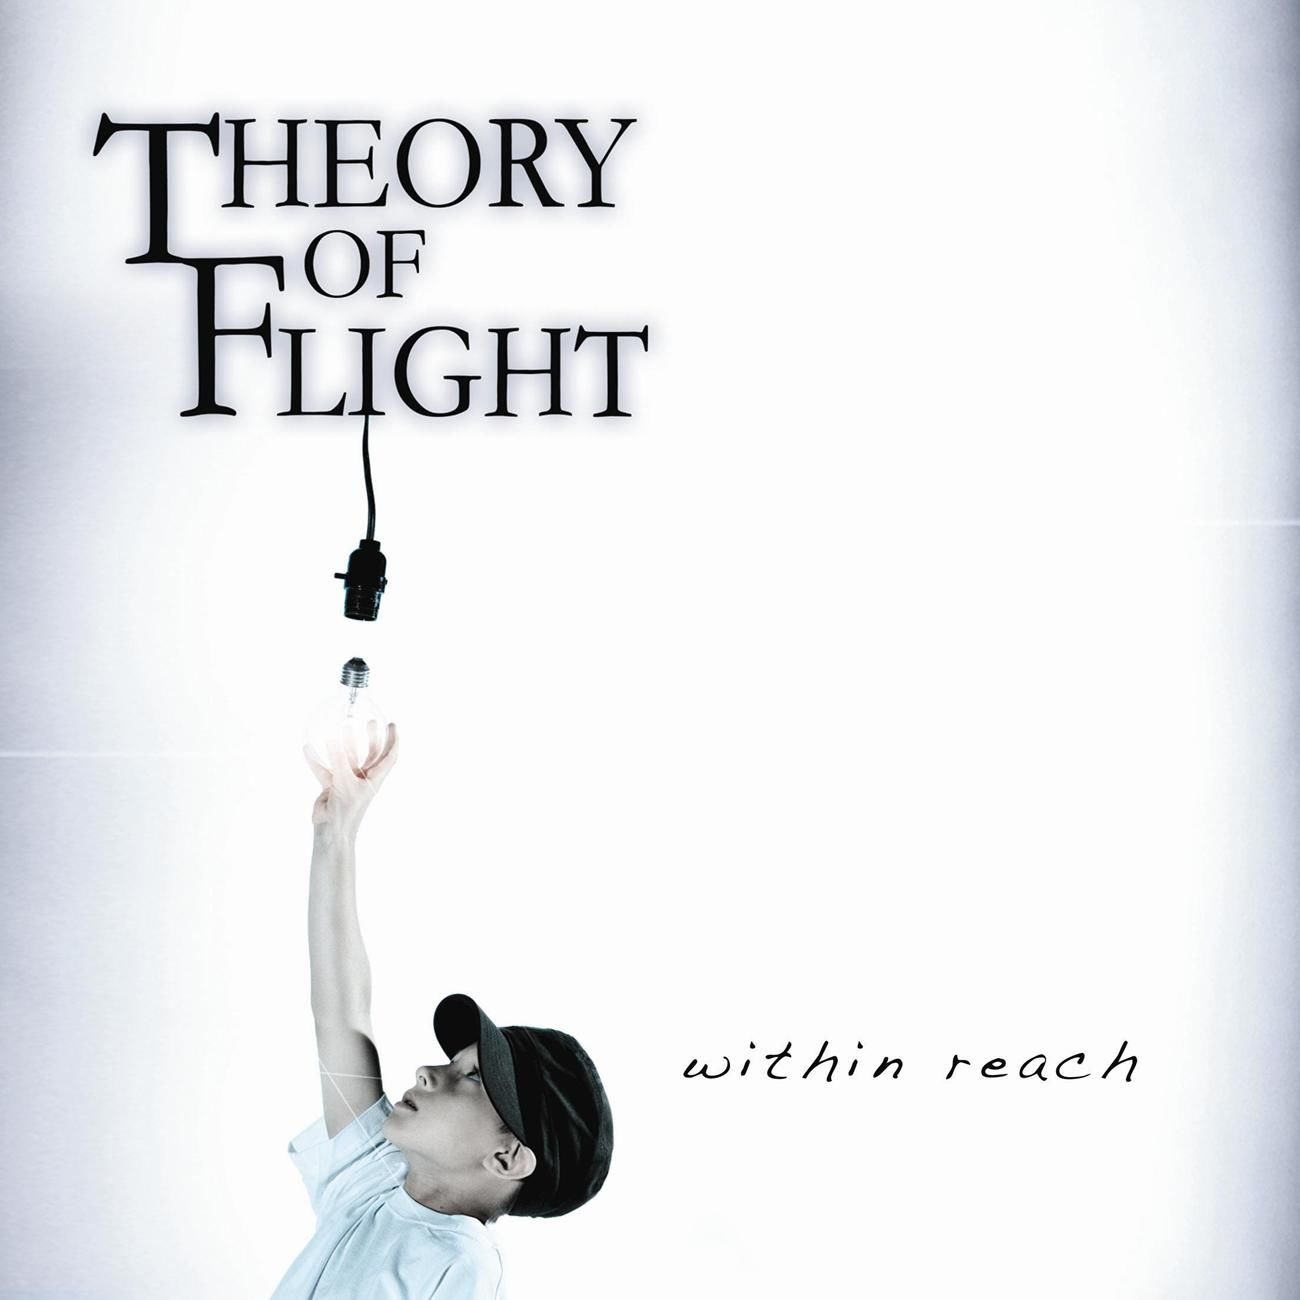 Reach within обложка альбома. Theories of Flight. Theorem reach. Within reach